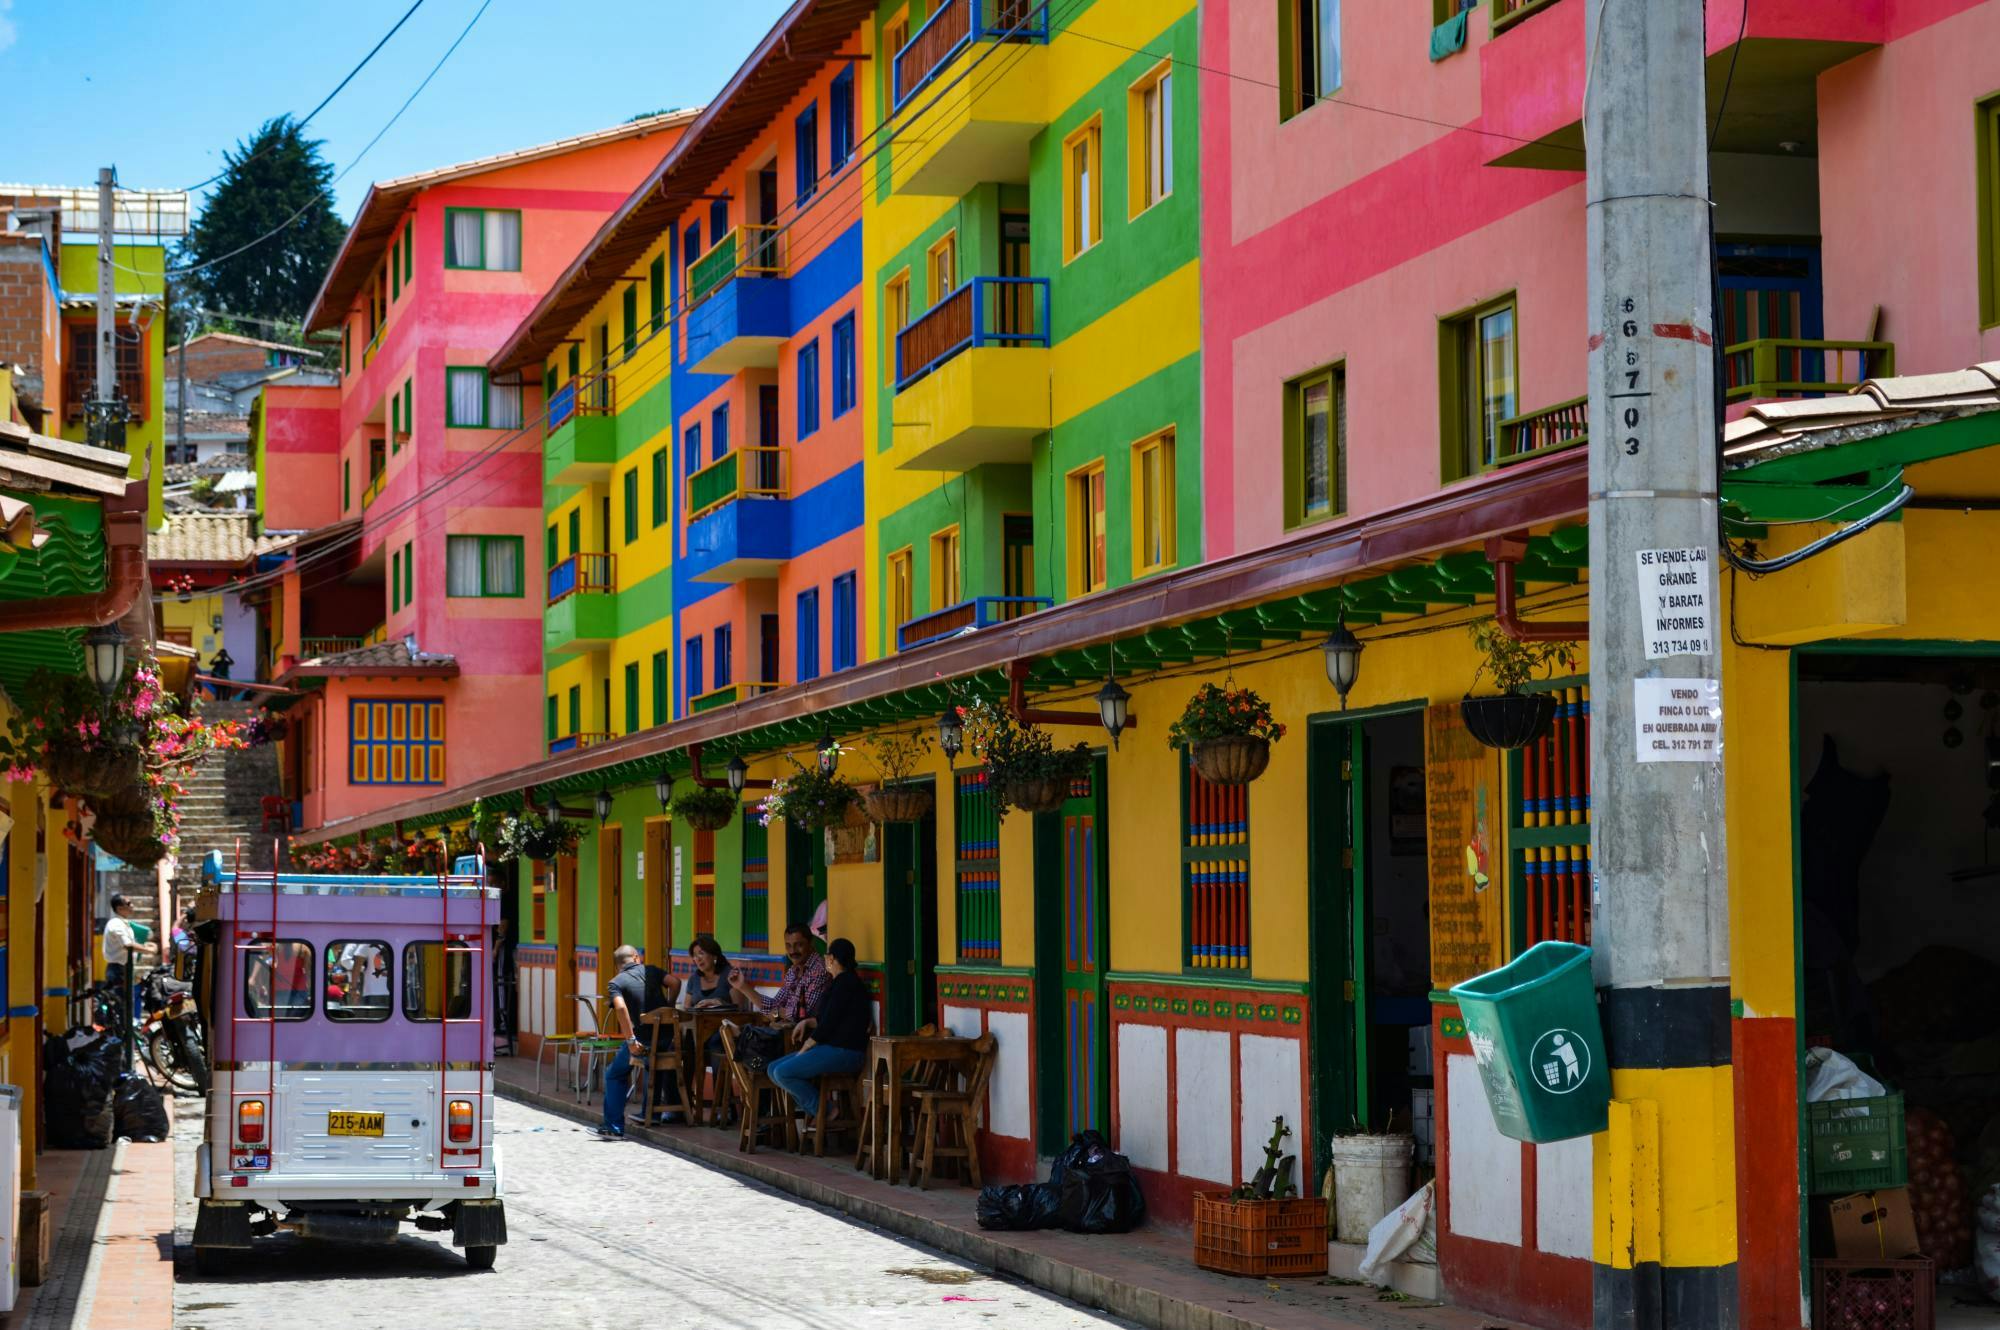 Colorful Colombia street with a trolly car